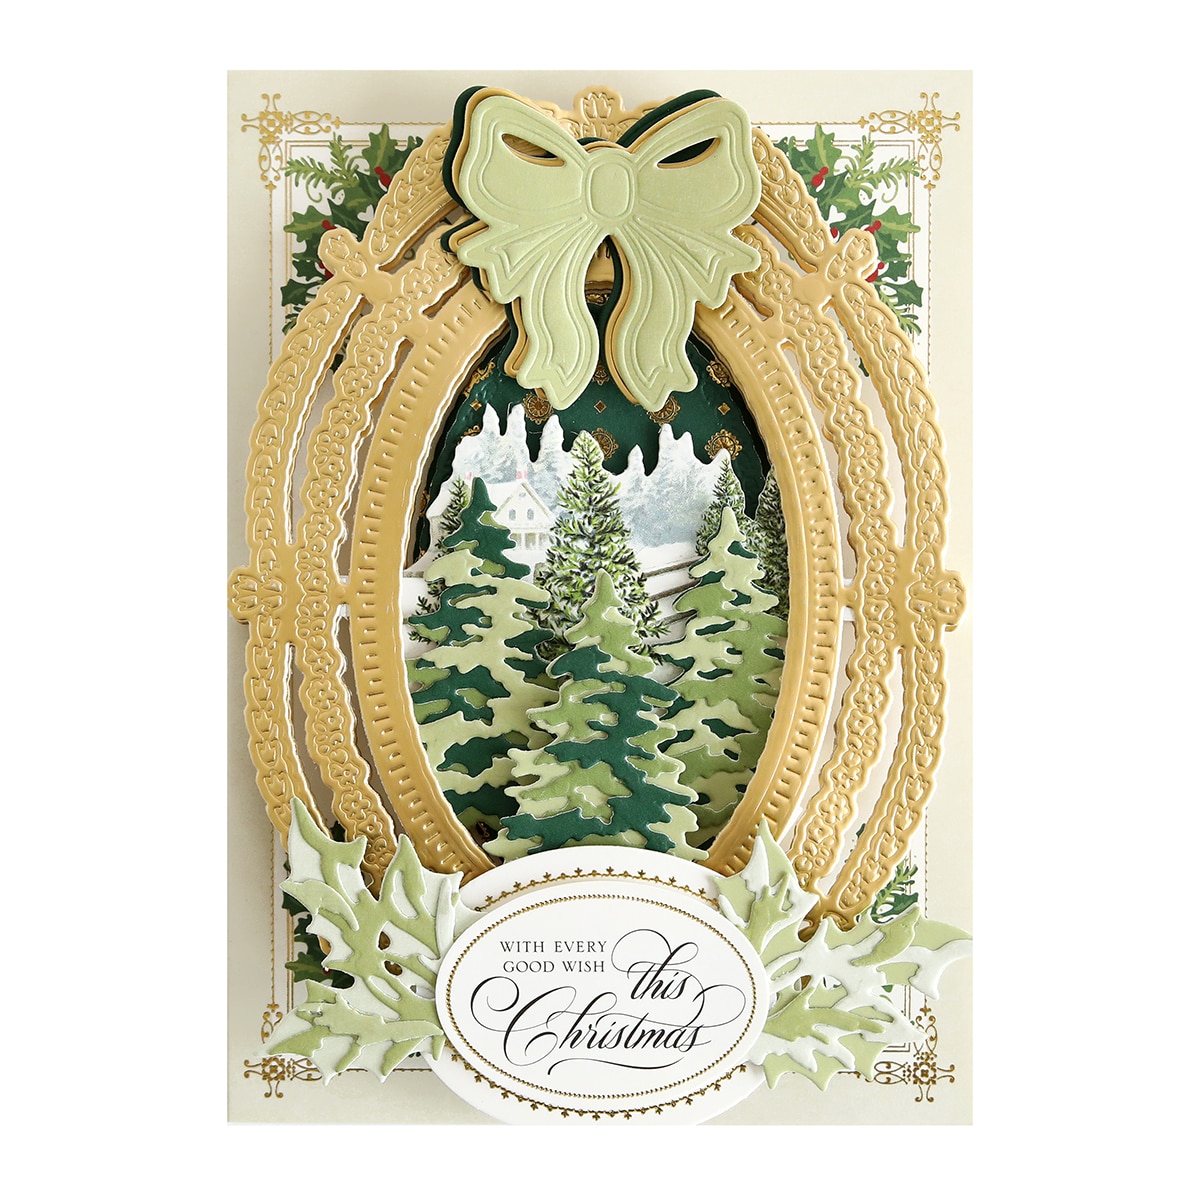 A christmas card with a gold frame and a bow.